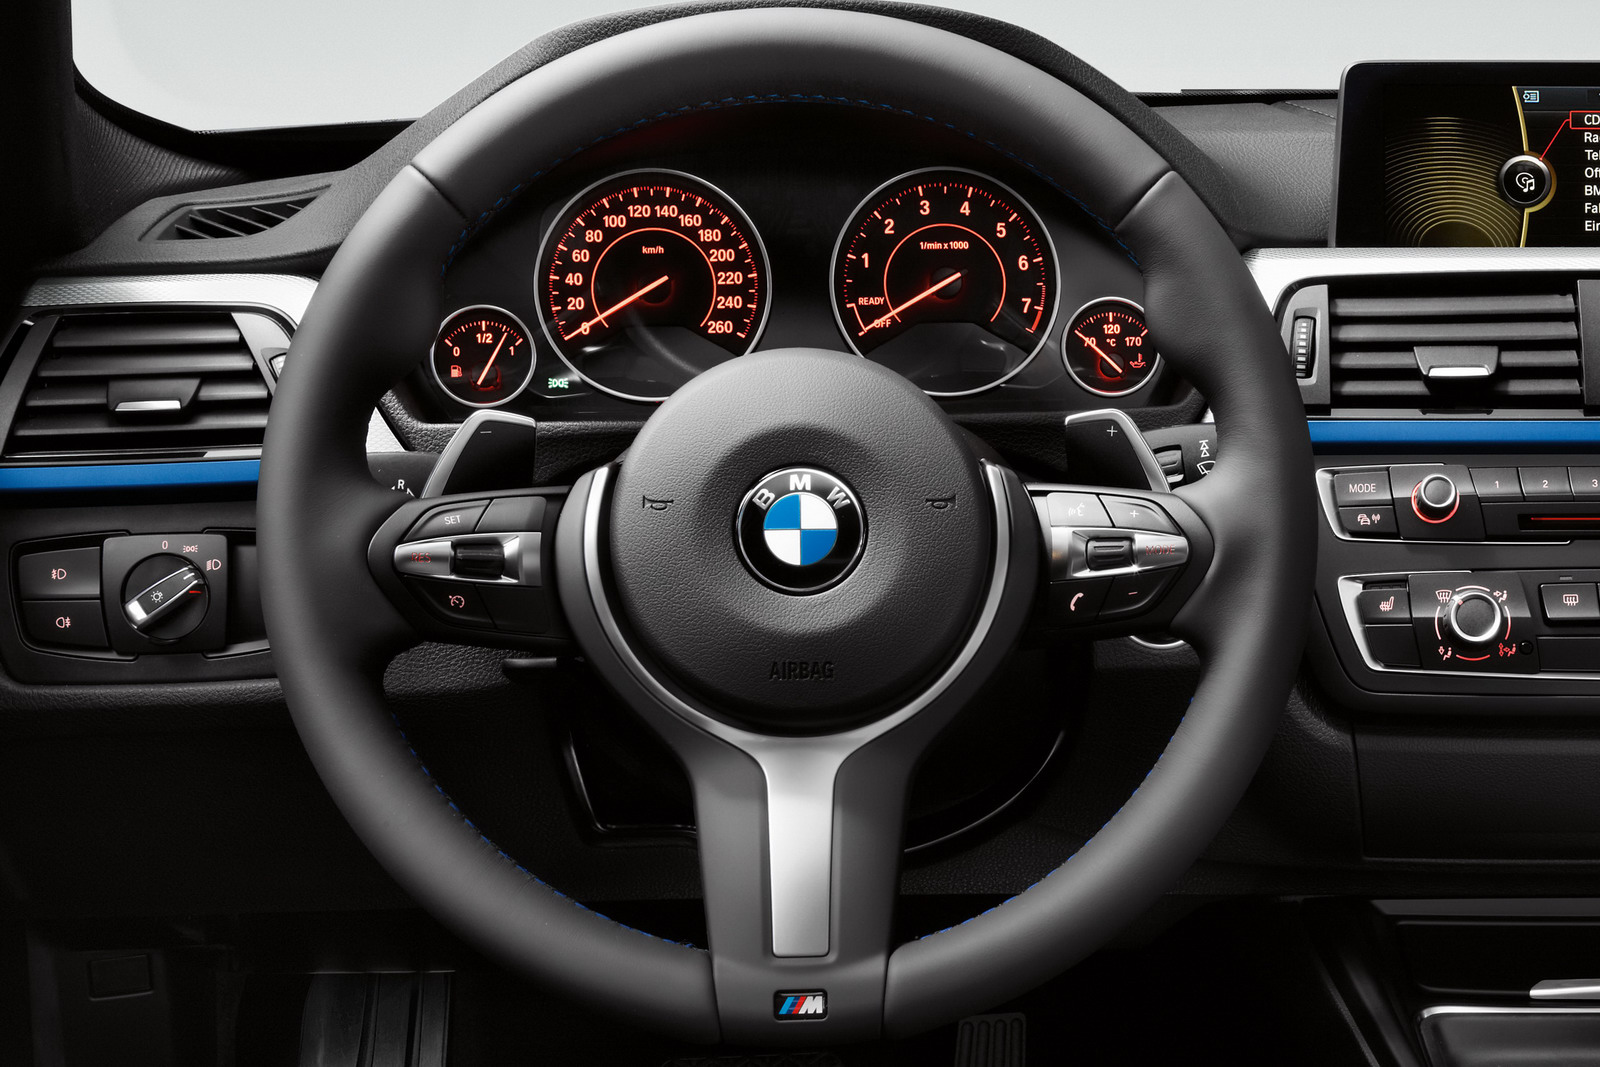 Defective Airbags Found in Repaired BMWs, Prompting Fresh Recall